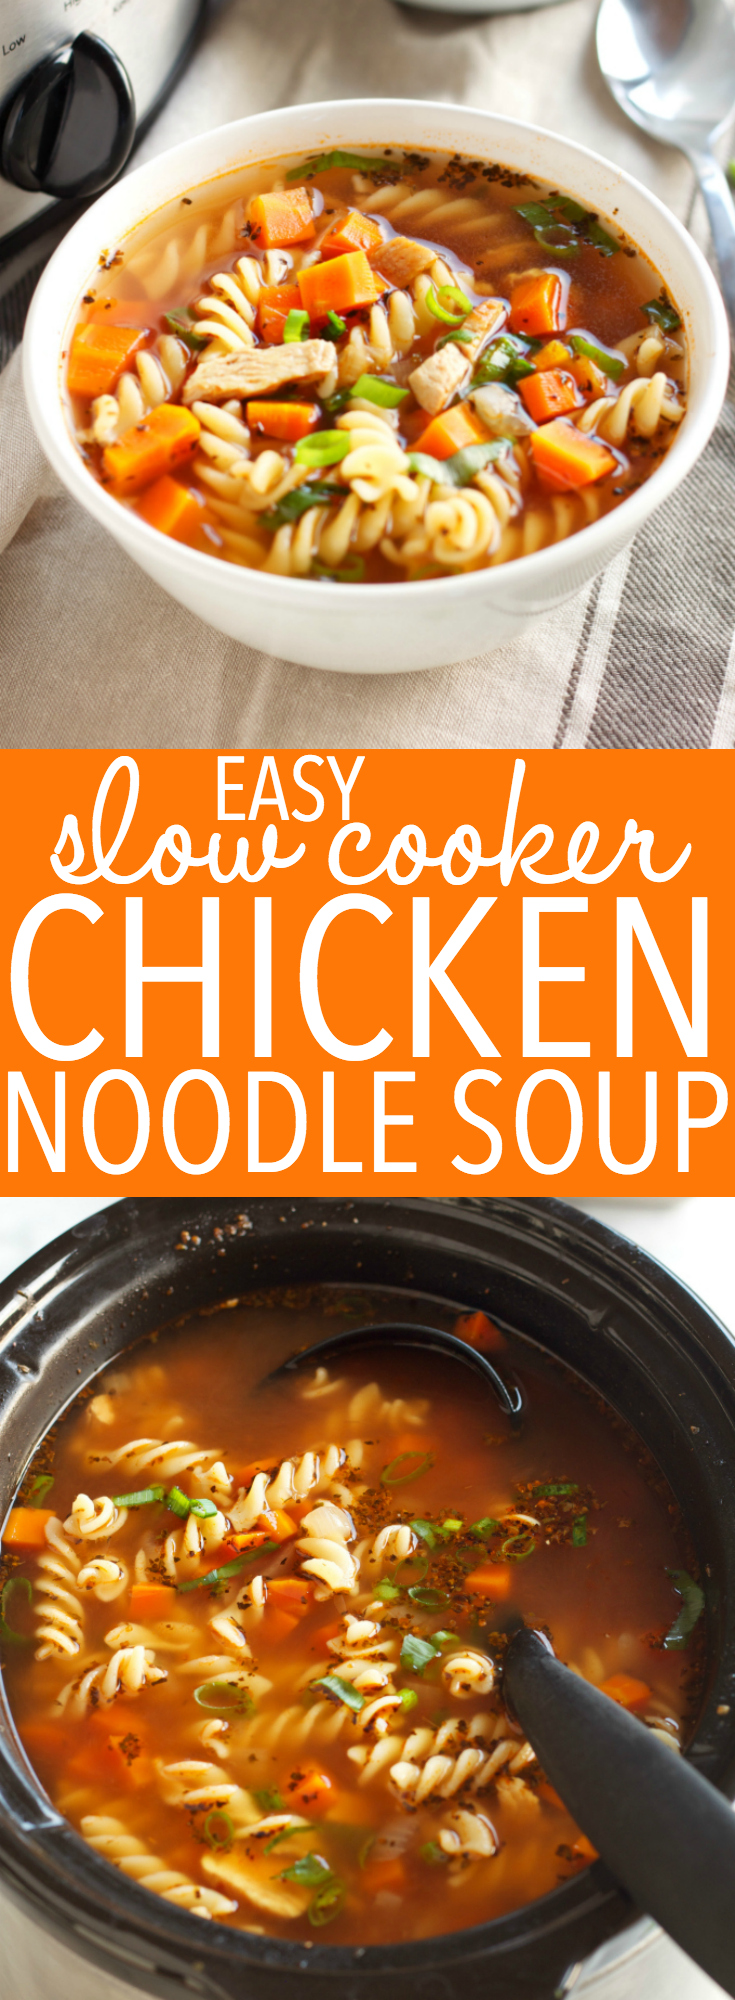 This Best Ever Slow Cooker Chicken Noodle Soup is healthy, wholesome, packed with veggies and lean chicken, and it's so easy to make in the Crock Pot or slow cooker!! It's the perfect soup for sick days and snow days! Recipe from thebusybaker.ca! #chickensoup #healthysoup #slowcookersoup #crockpotsoup #chickennoodlesoup via @busybakerblog